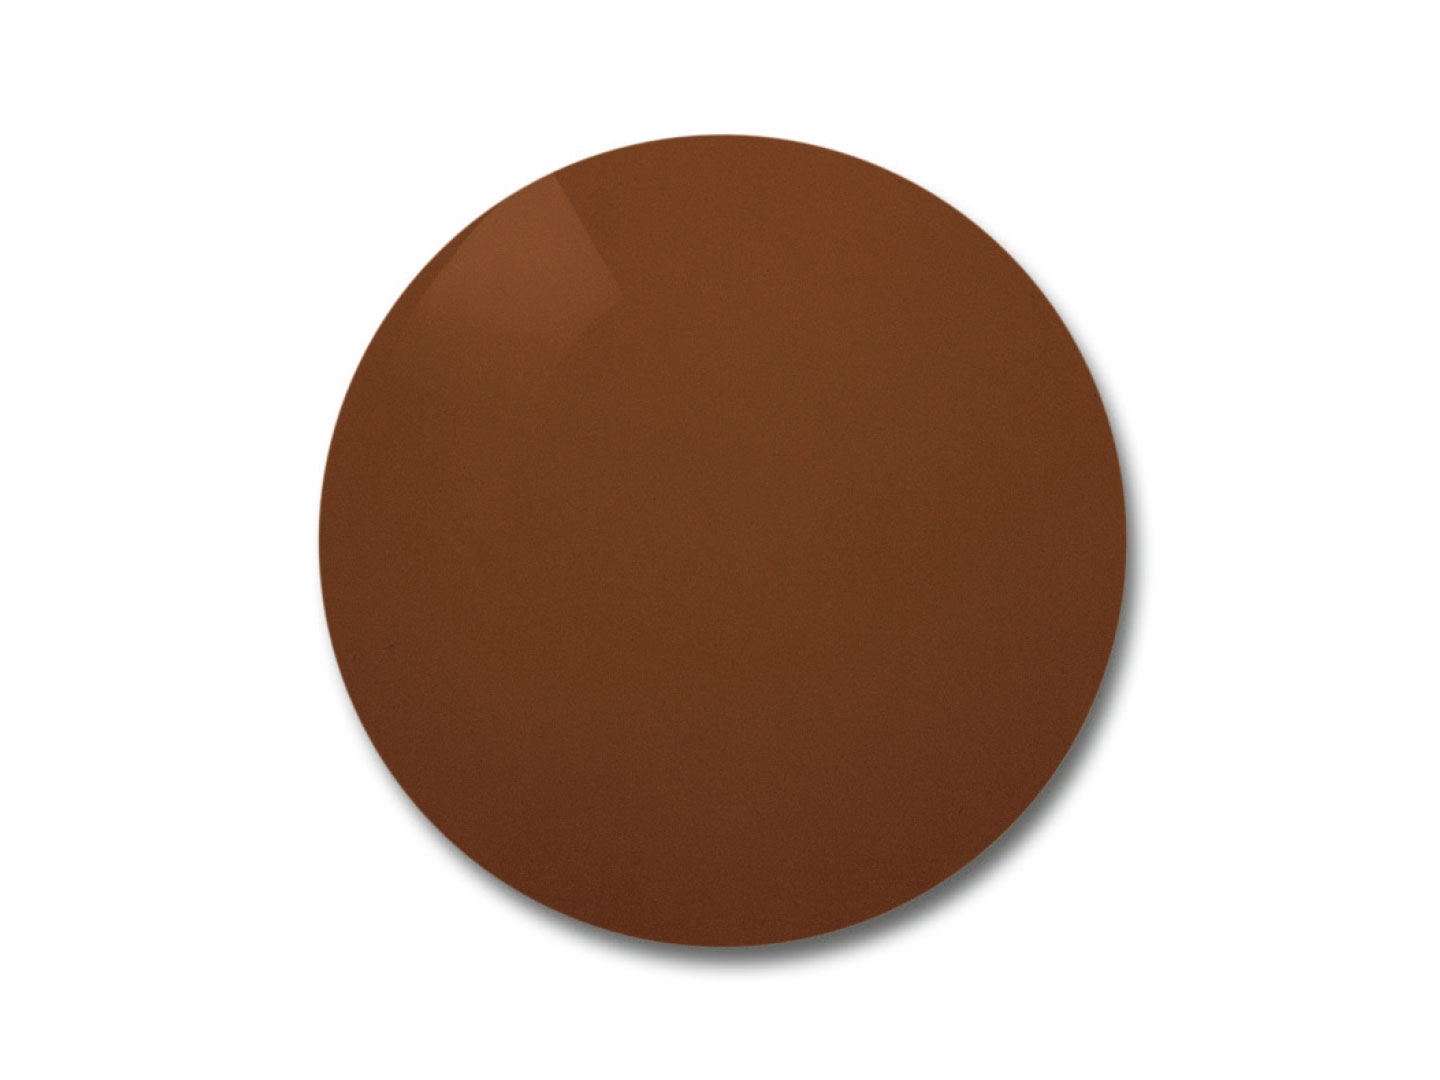 Colour example for the Polarised Skylet Road lenses.